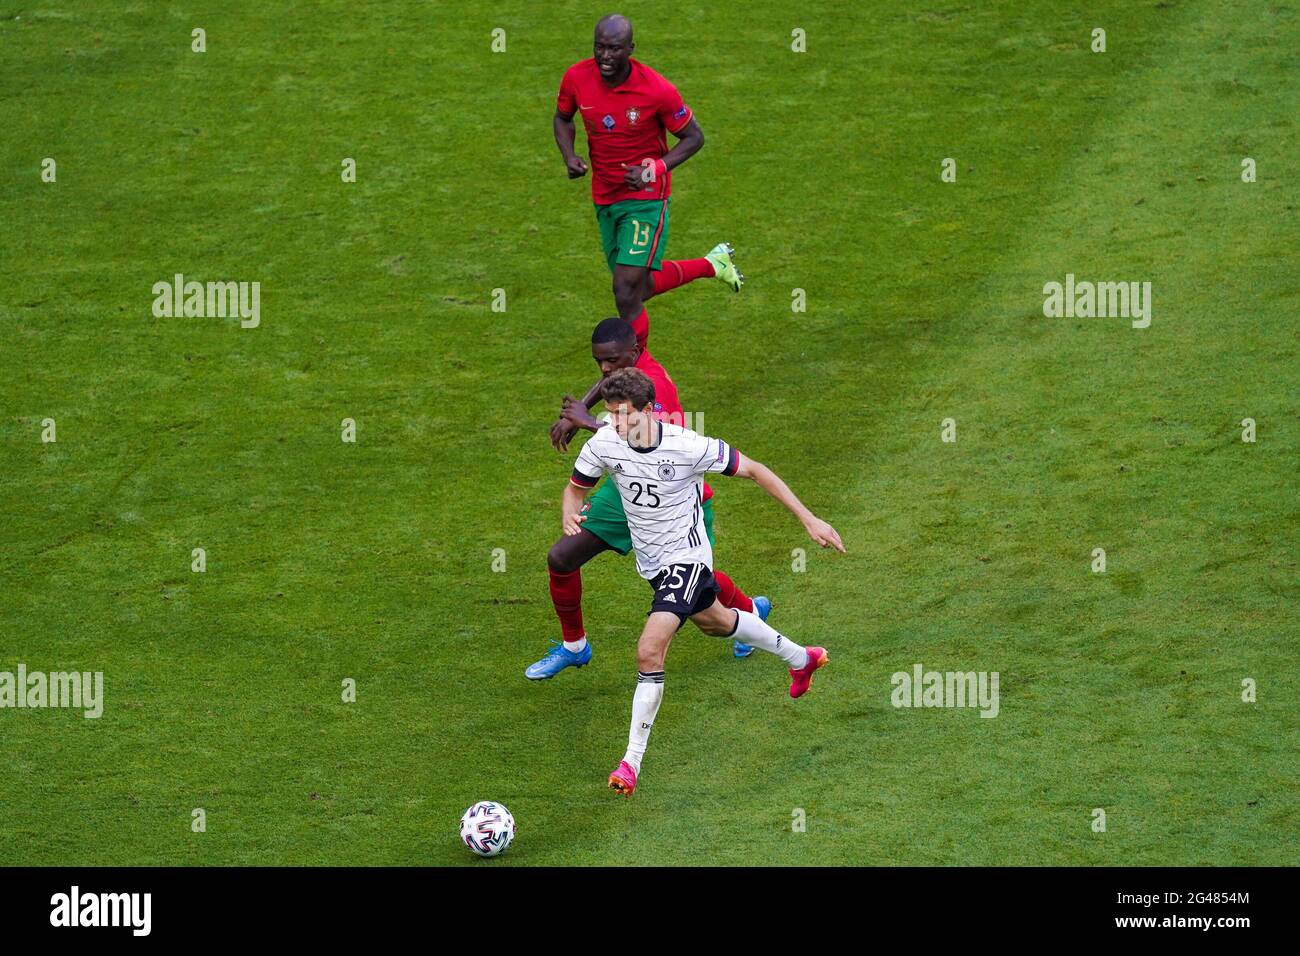 MUNCHEN, GERMANY - JUNE 19: Thomas Muller of Germany and William Carvalho of Portugal during the UEFA Euro 2020 Group F match between Portugal and Germany at Allianz Arena on June 19, 2021 in Munchen, Germany (Photo by Andre Weening/Orange Pictures) Stock Photo